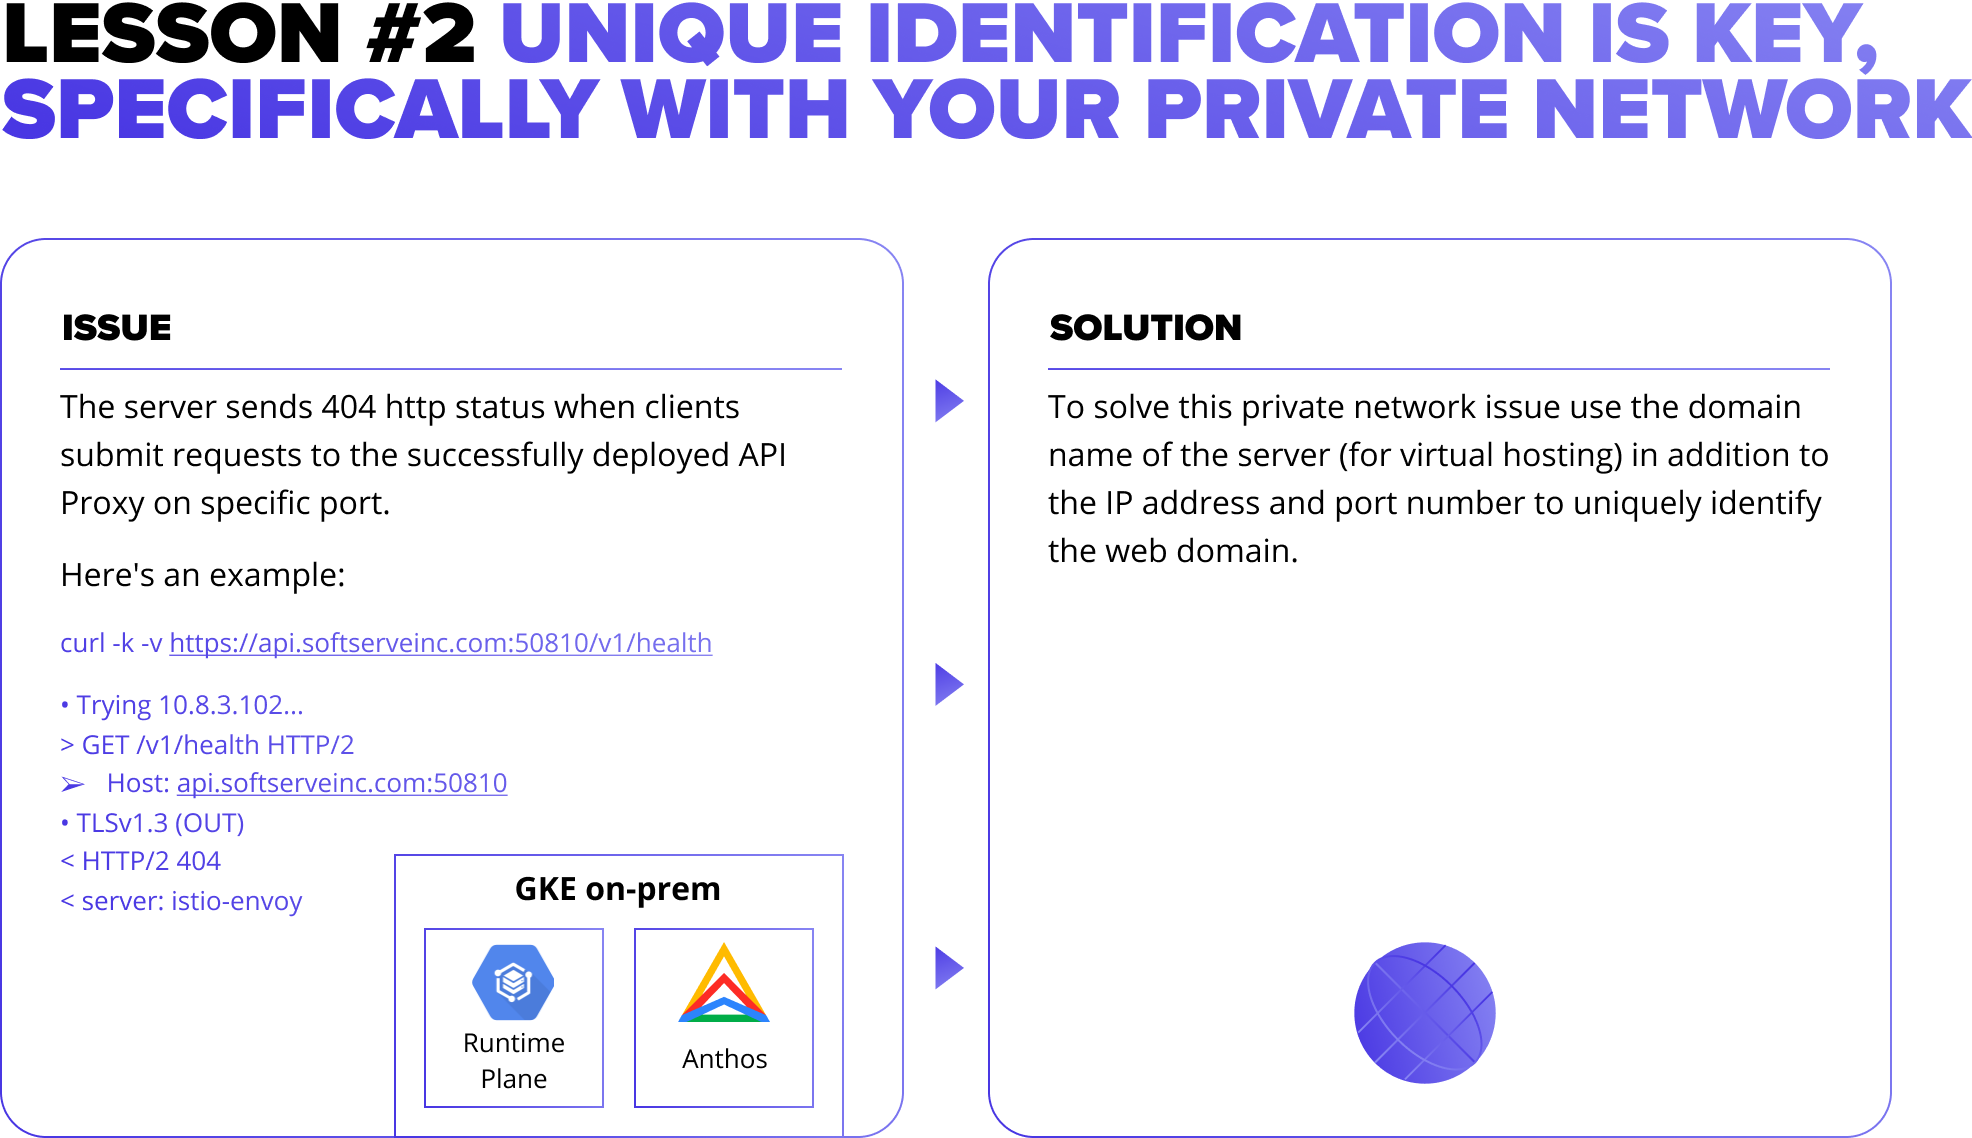 LESSON #2: UNIQUE IDENTIFICATION IS KEY, SPECIFICALLY WITH YOUR PRIVATE NETWORK